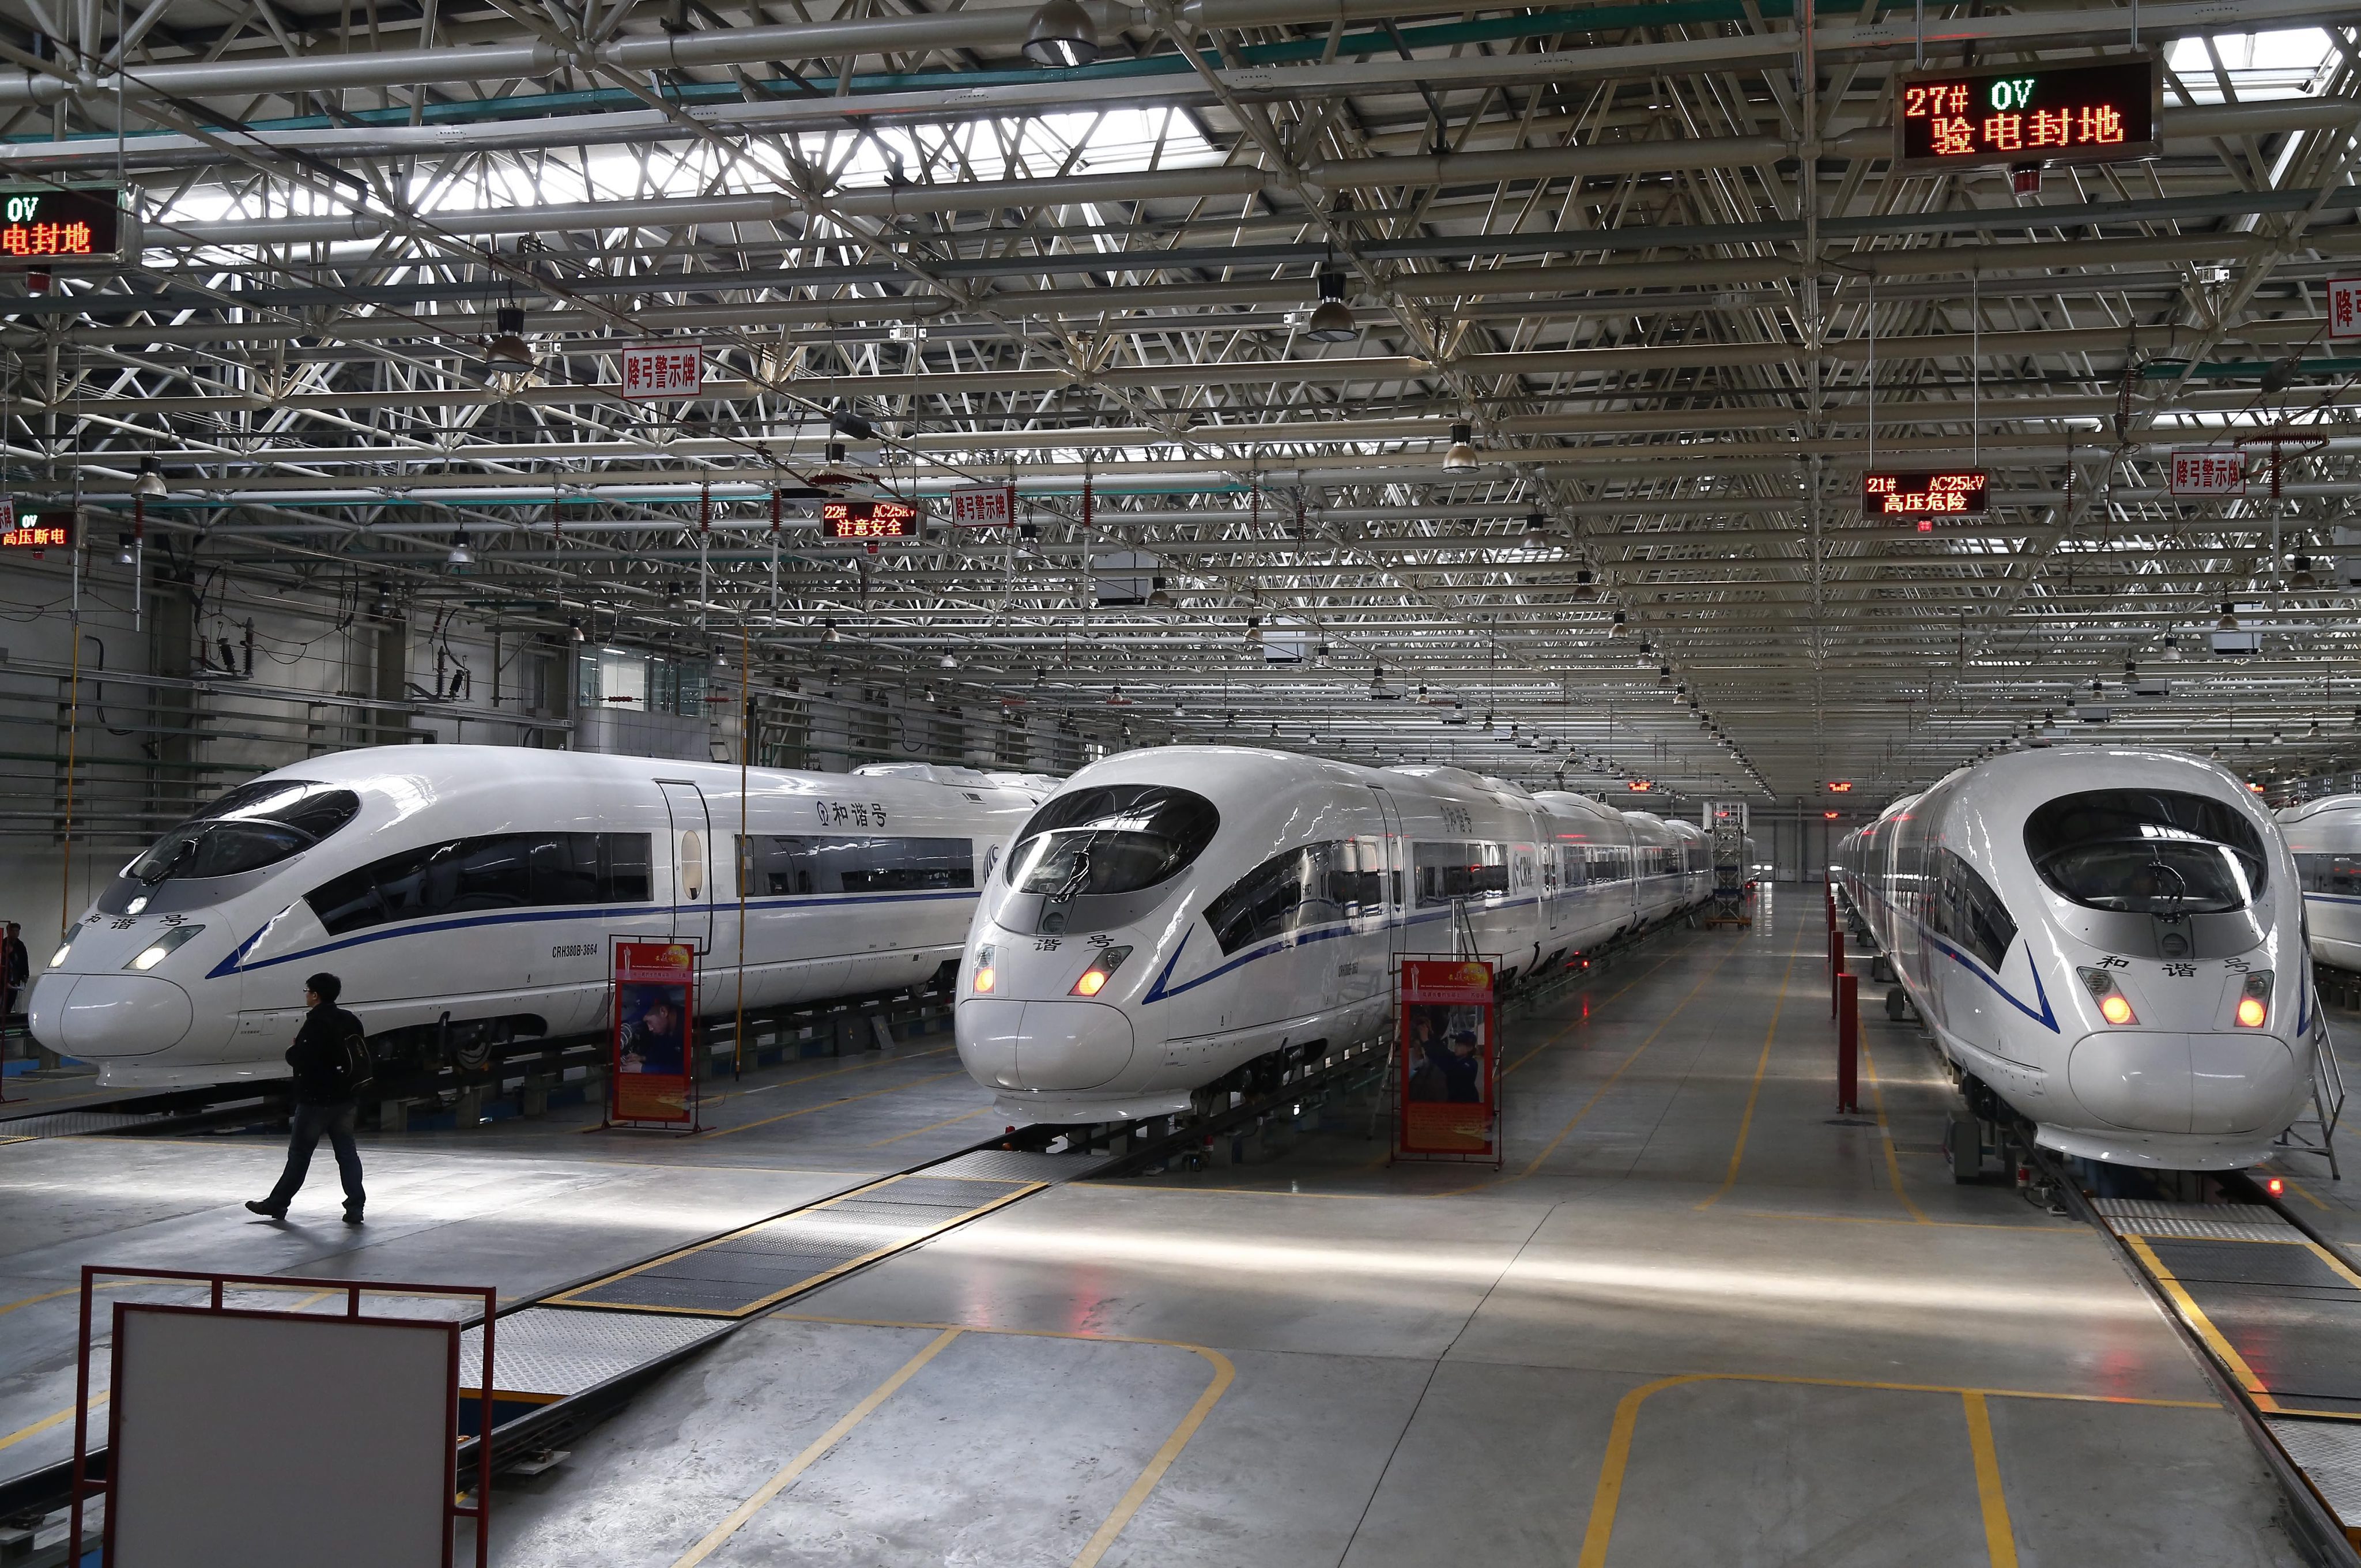 China is rapidly expanding its rail links across the country, with bullet trains more than halving journey times between key cities like Beijing and Shanghai. Photo: EPA